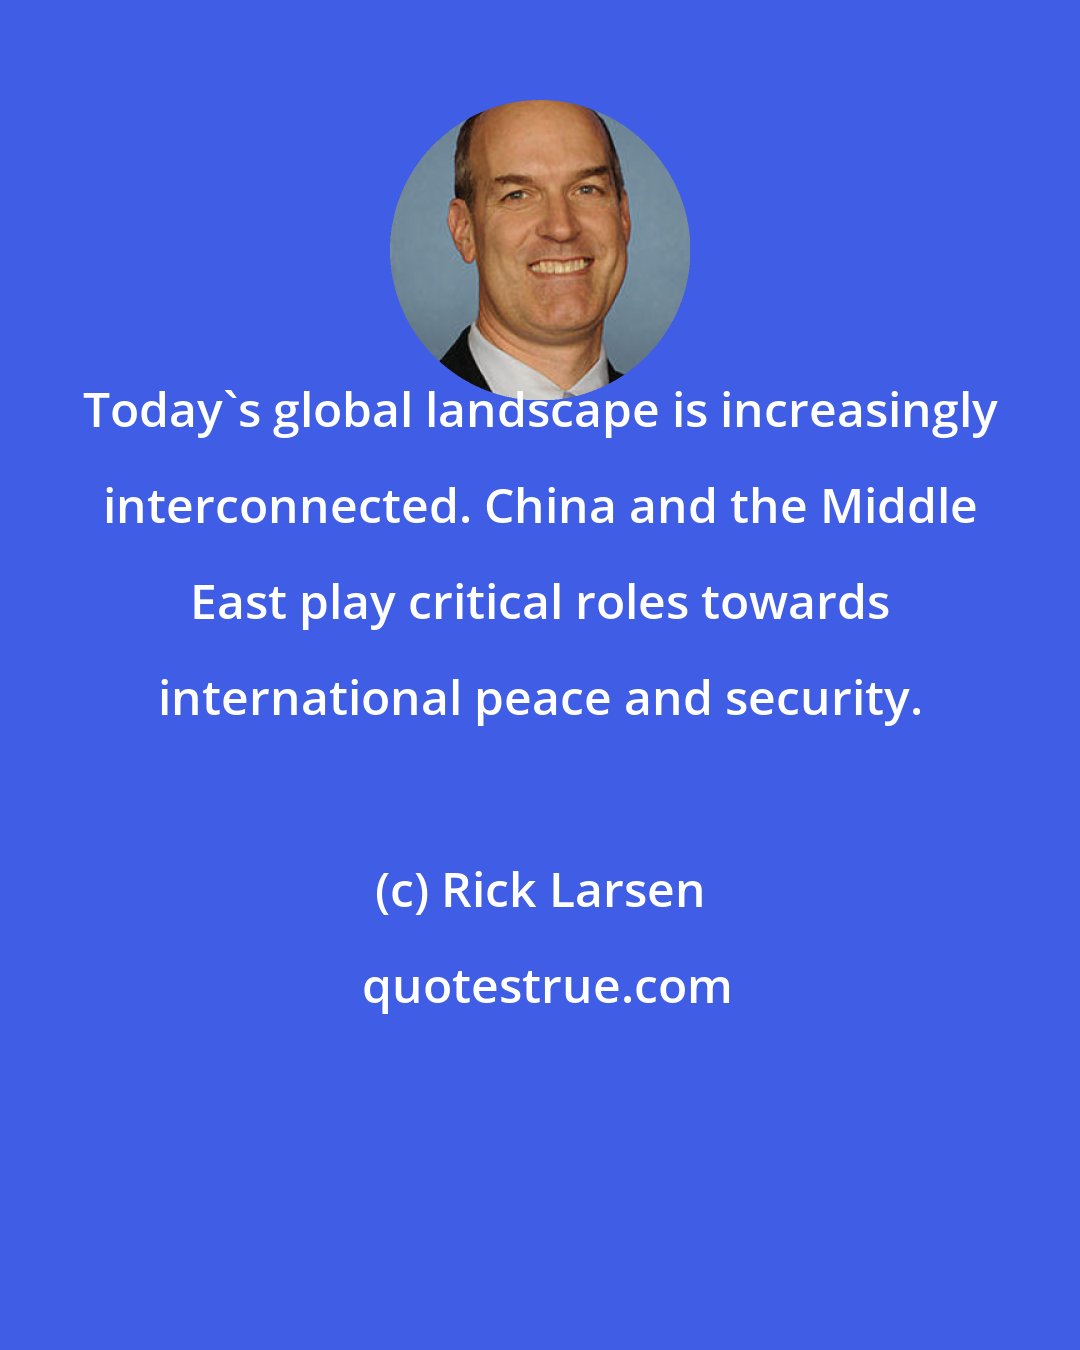 Rick Larsen: Today's global landscape is increasingly interconnected. China and the Middle East play critical roles towards international peace and security.